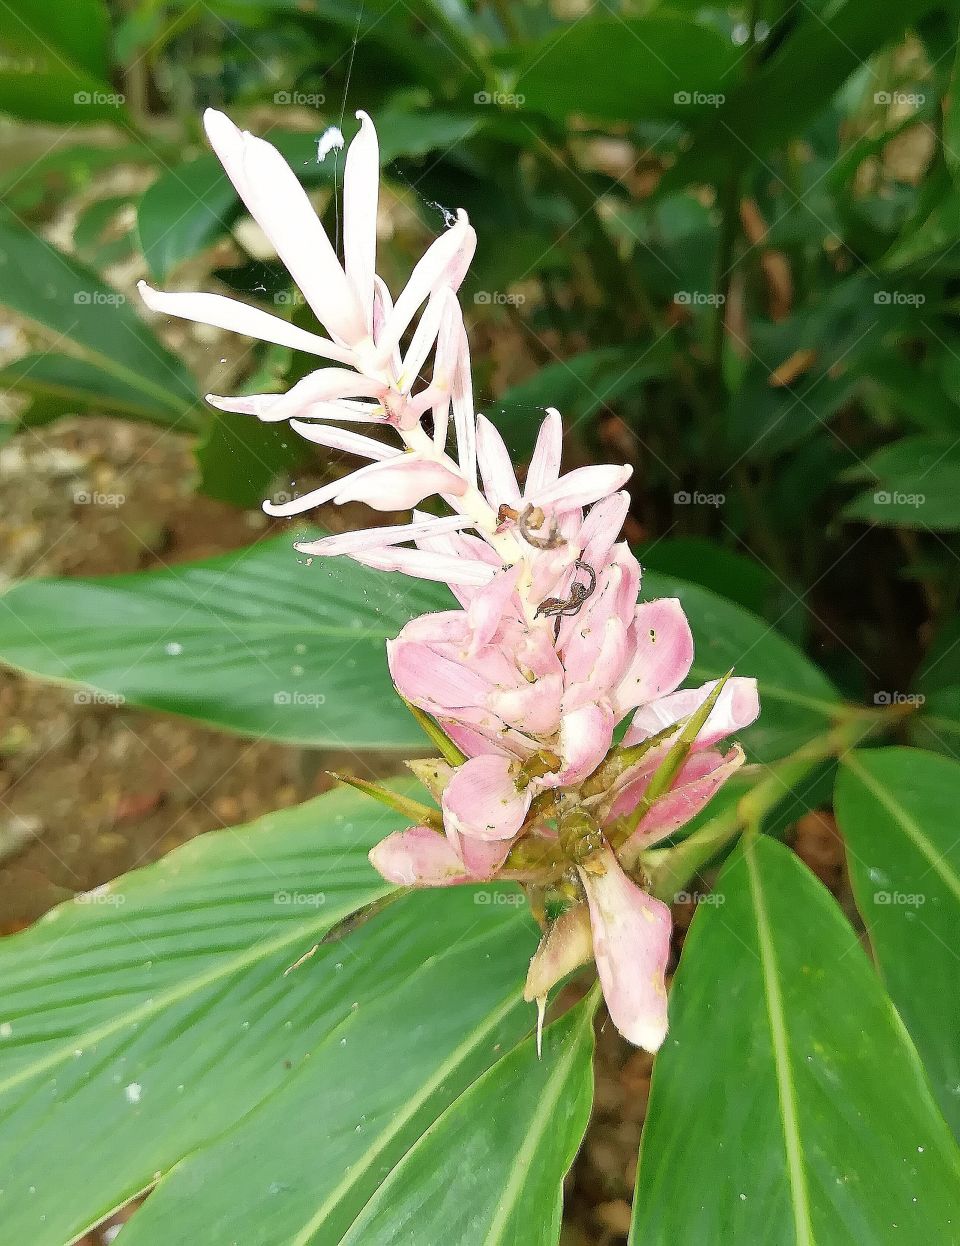 Baby pink flower. Looks exotic and elegant!